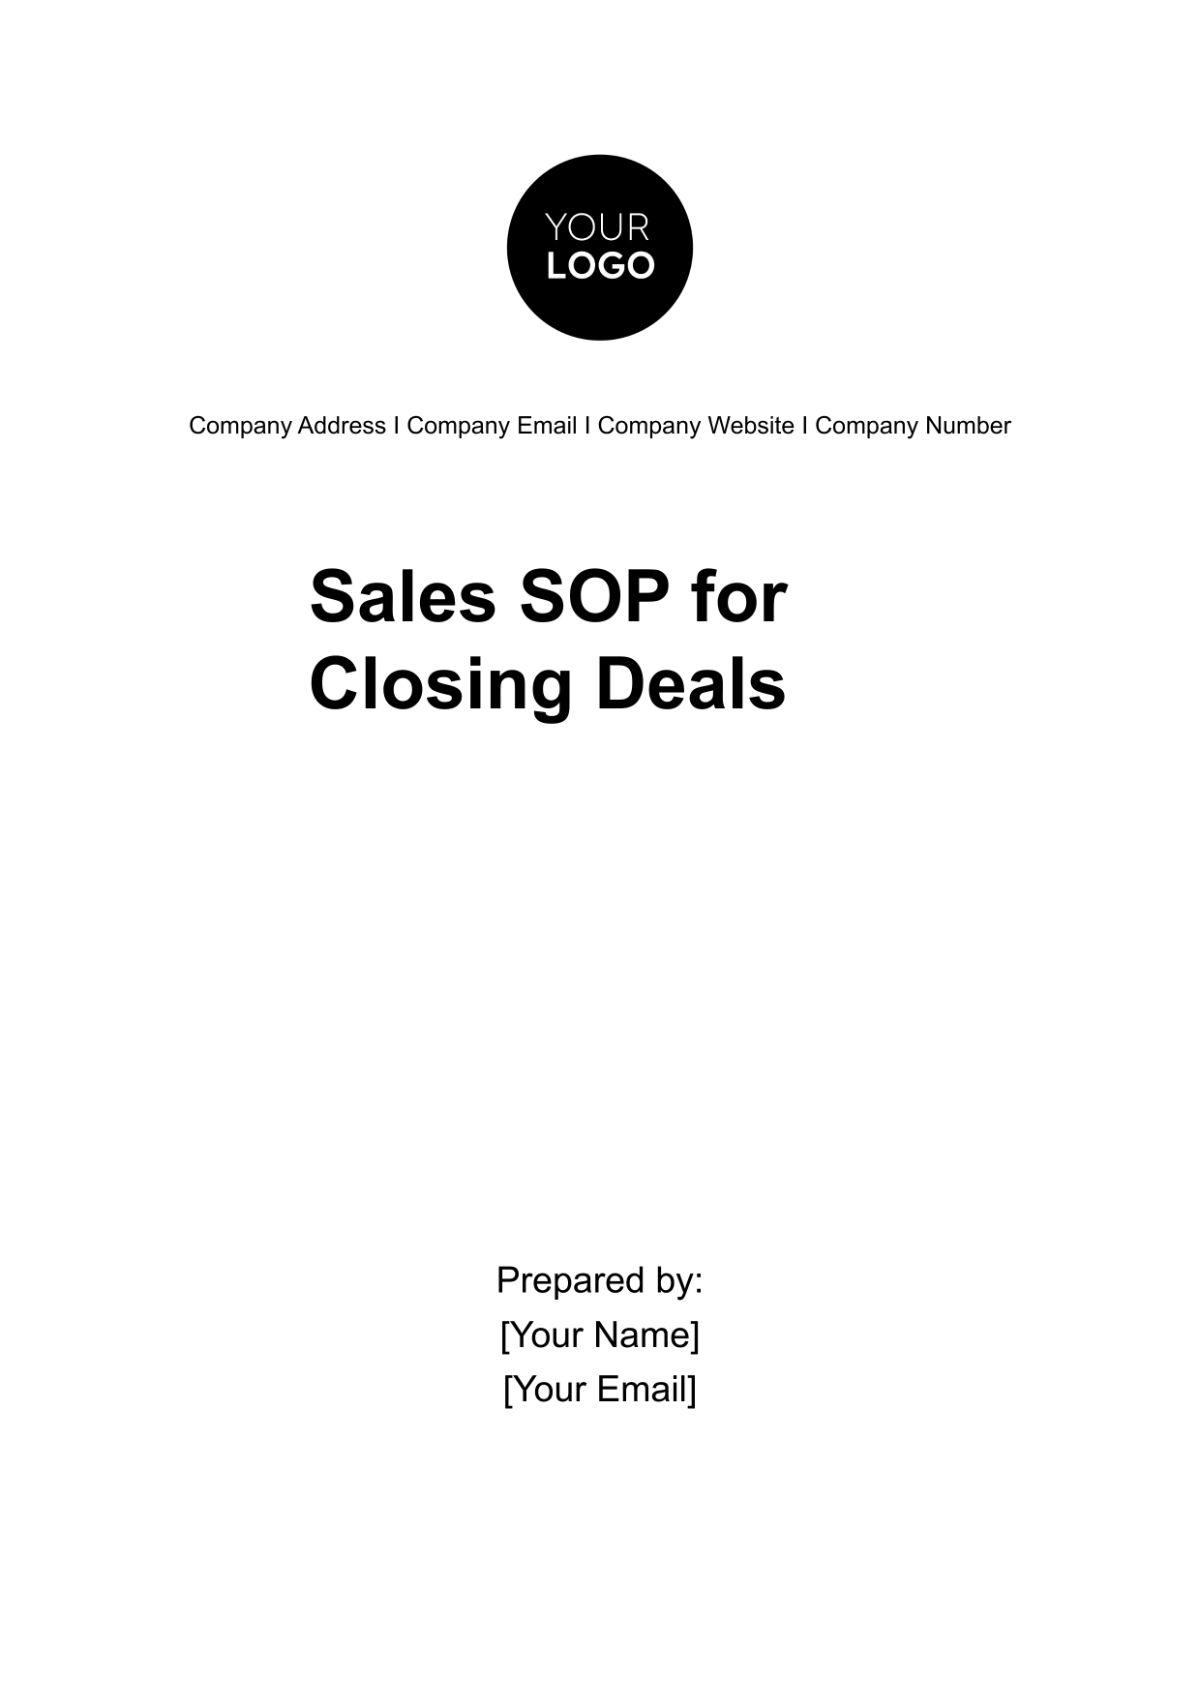 Free Sales SOP for Closing Deals Template